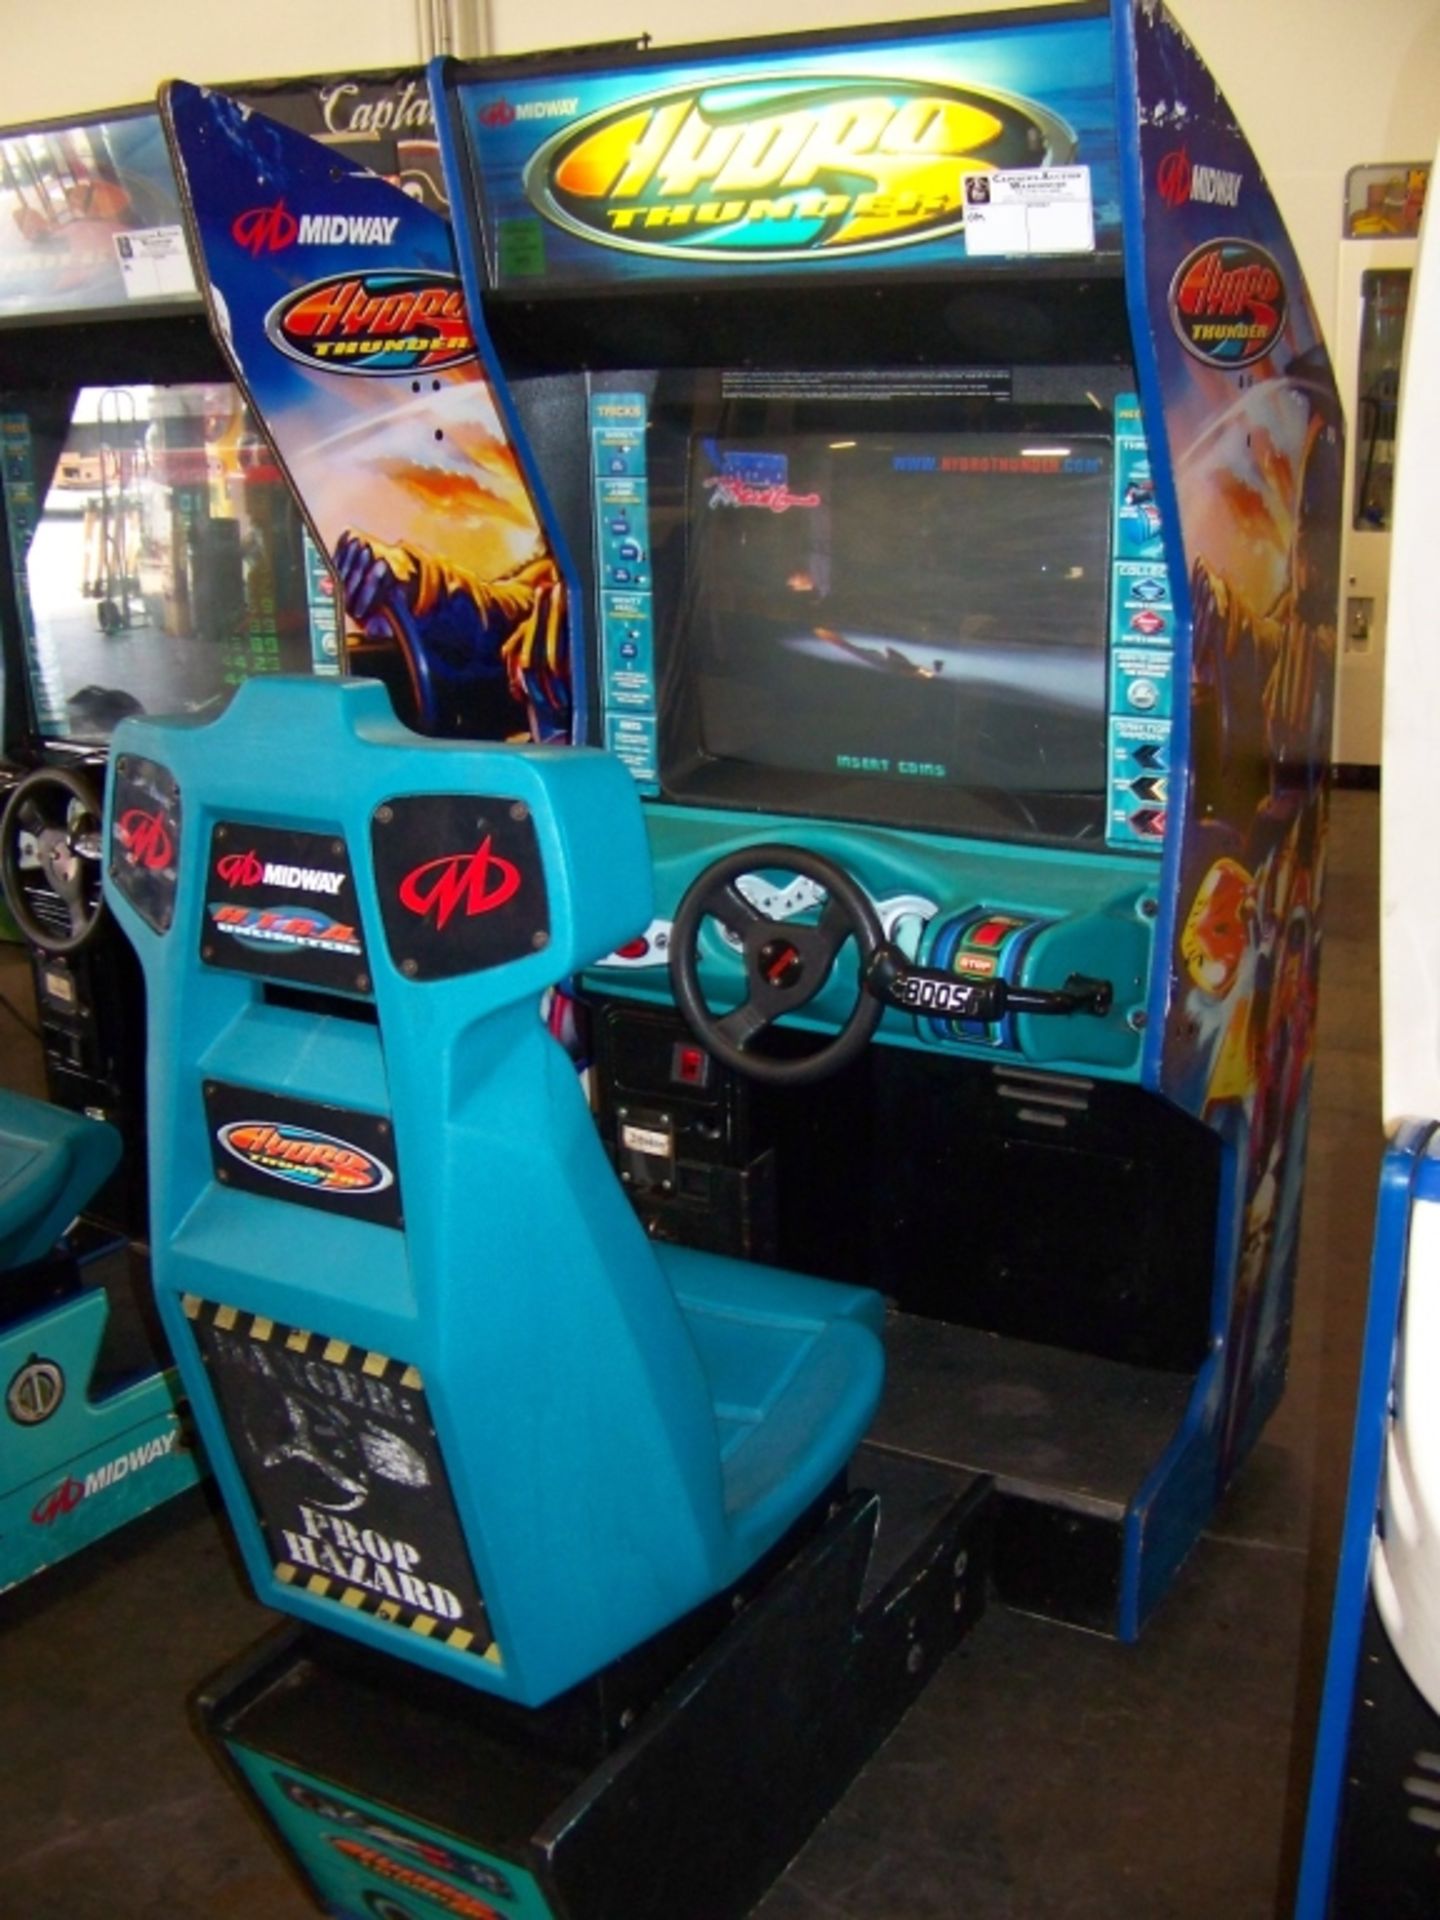 HYDRO THUNDER SITDOWN RACING ARCADE GAME  OM - Image 3 of 3